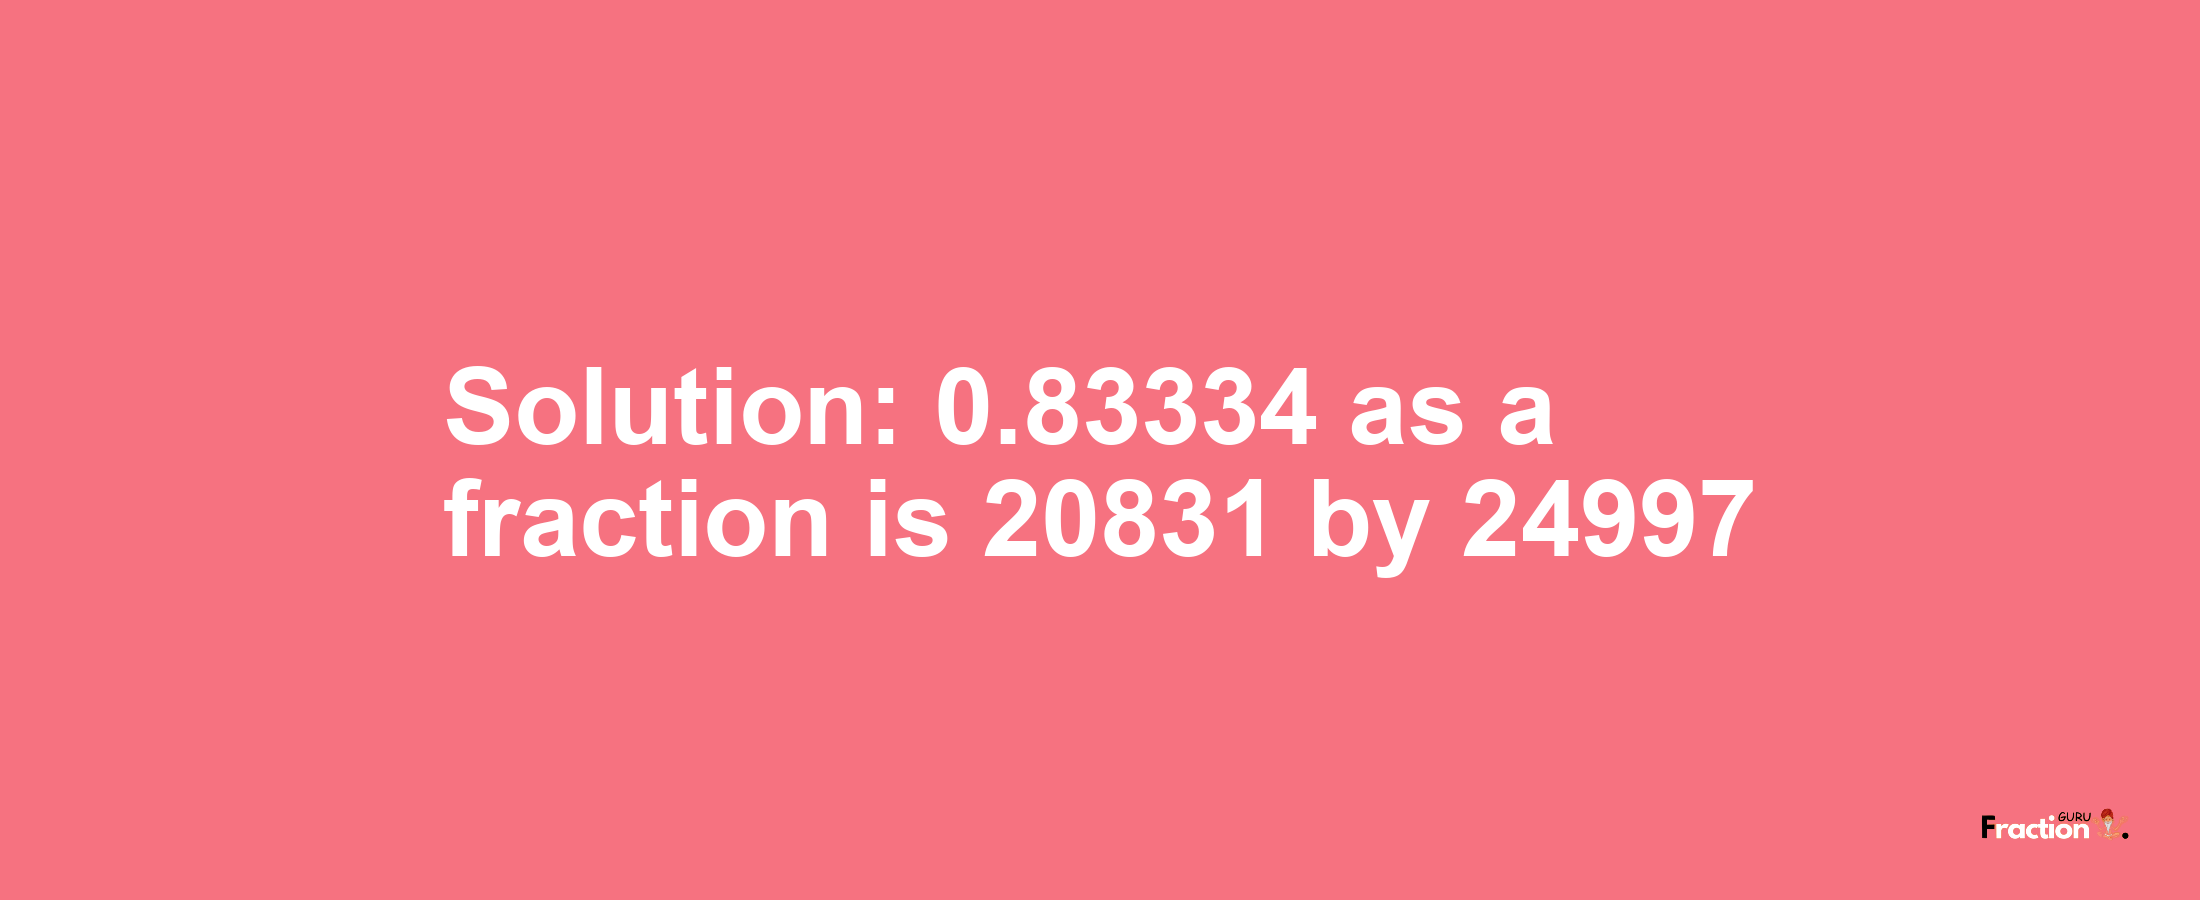 Solution:0.83334 as a fraction is 20831/24997